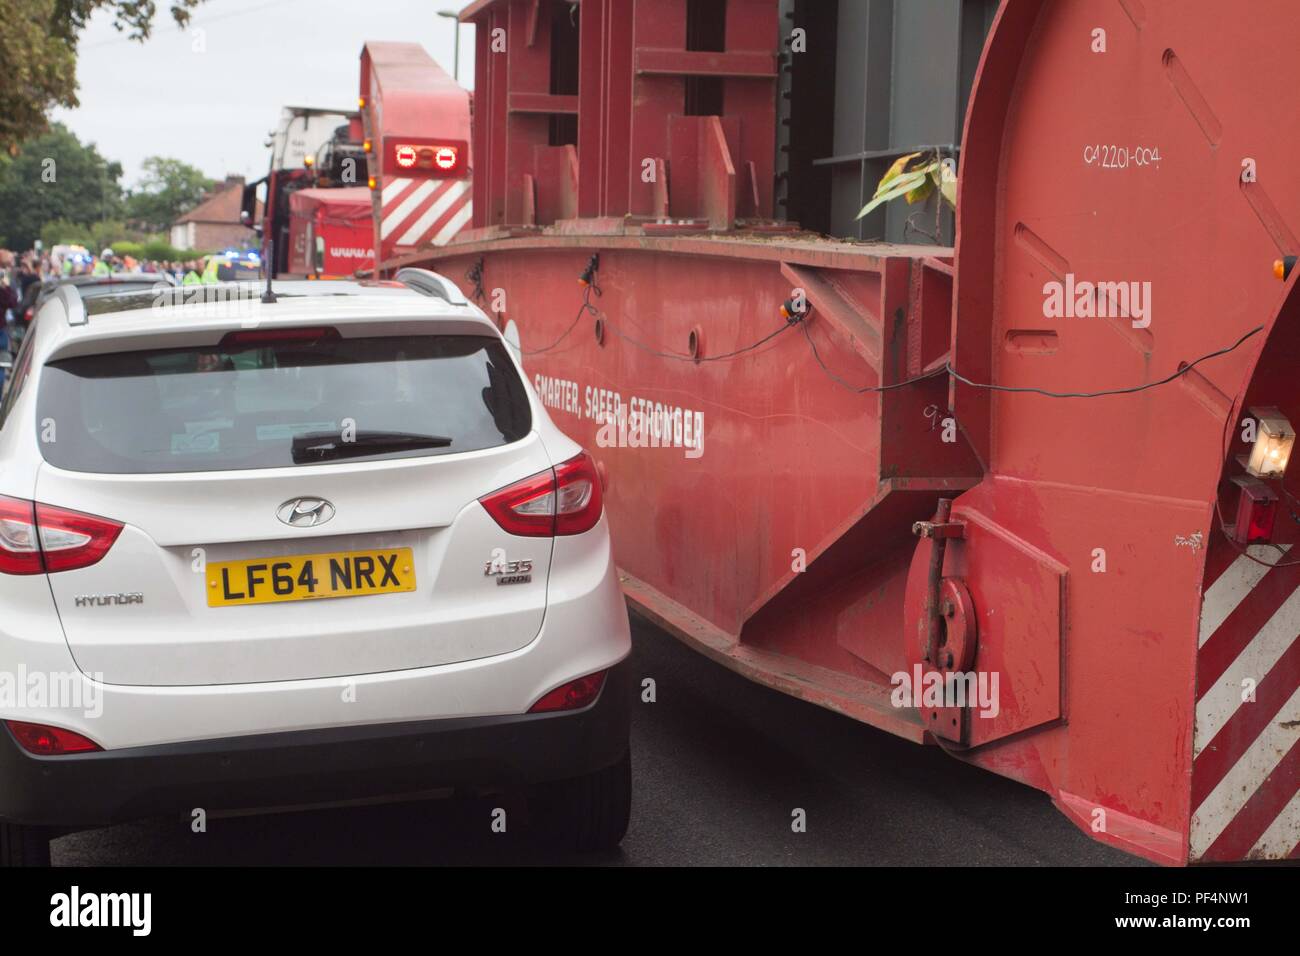 Surrey, UK. 19 August 2018.  68m long lorry carrying a electrical transformer navigates the narrow streets of Surrey. Credit: Andrew Spiers/Alamy Live News Stock Photo